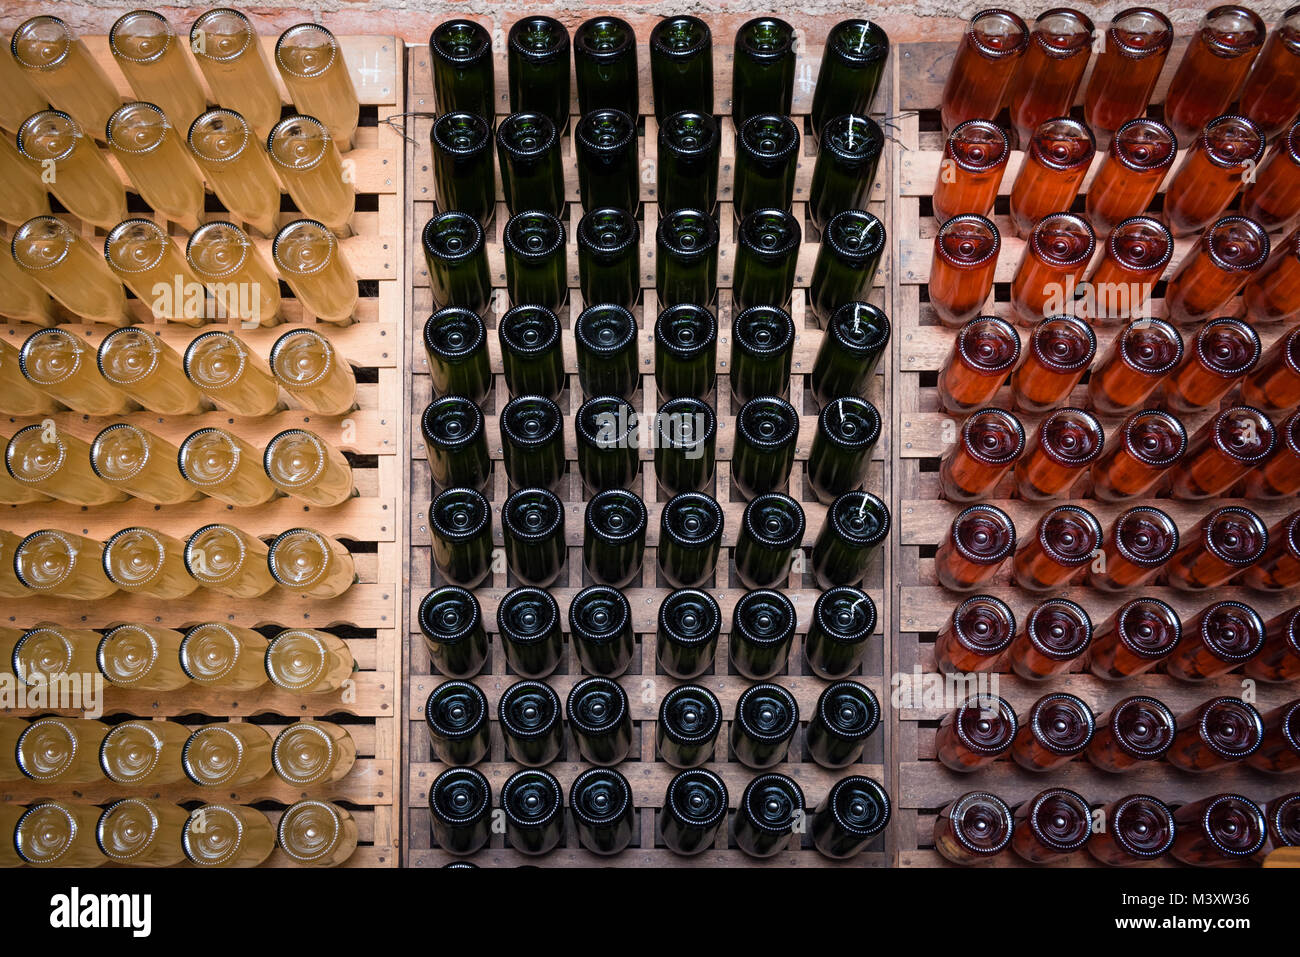 Sparkling wine bottles fermenting in winery Stock Photo